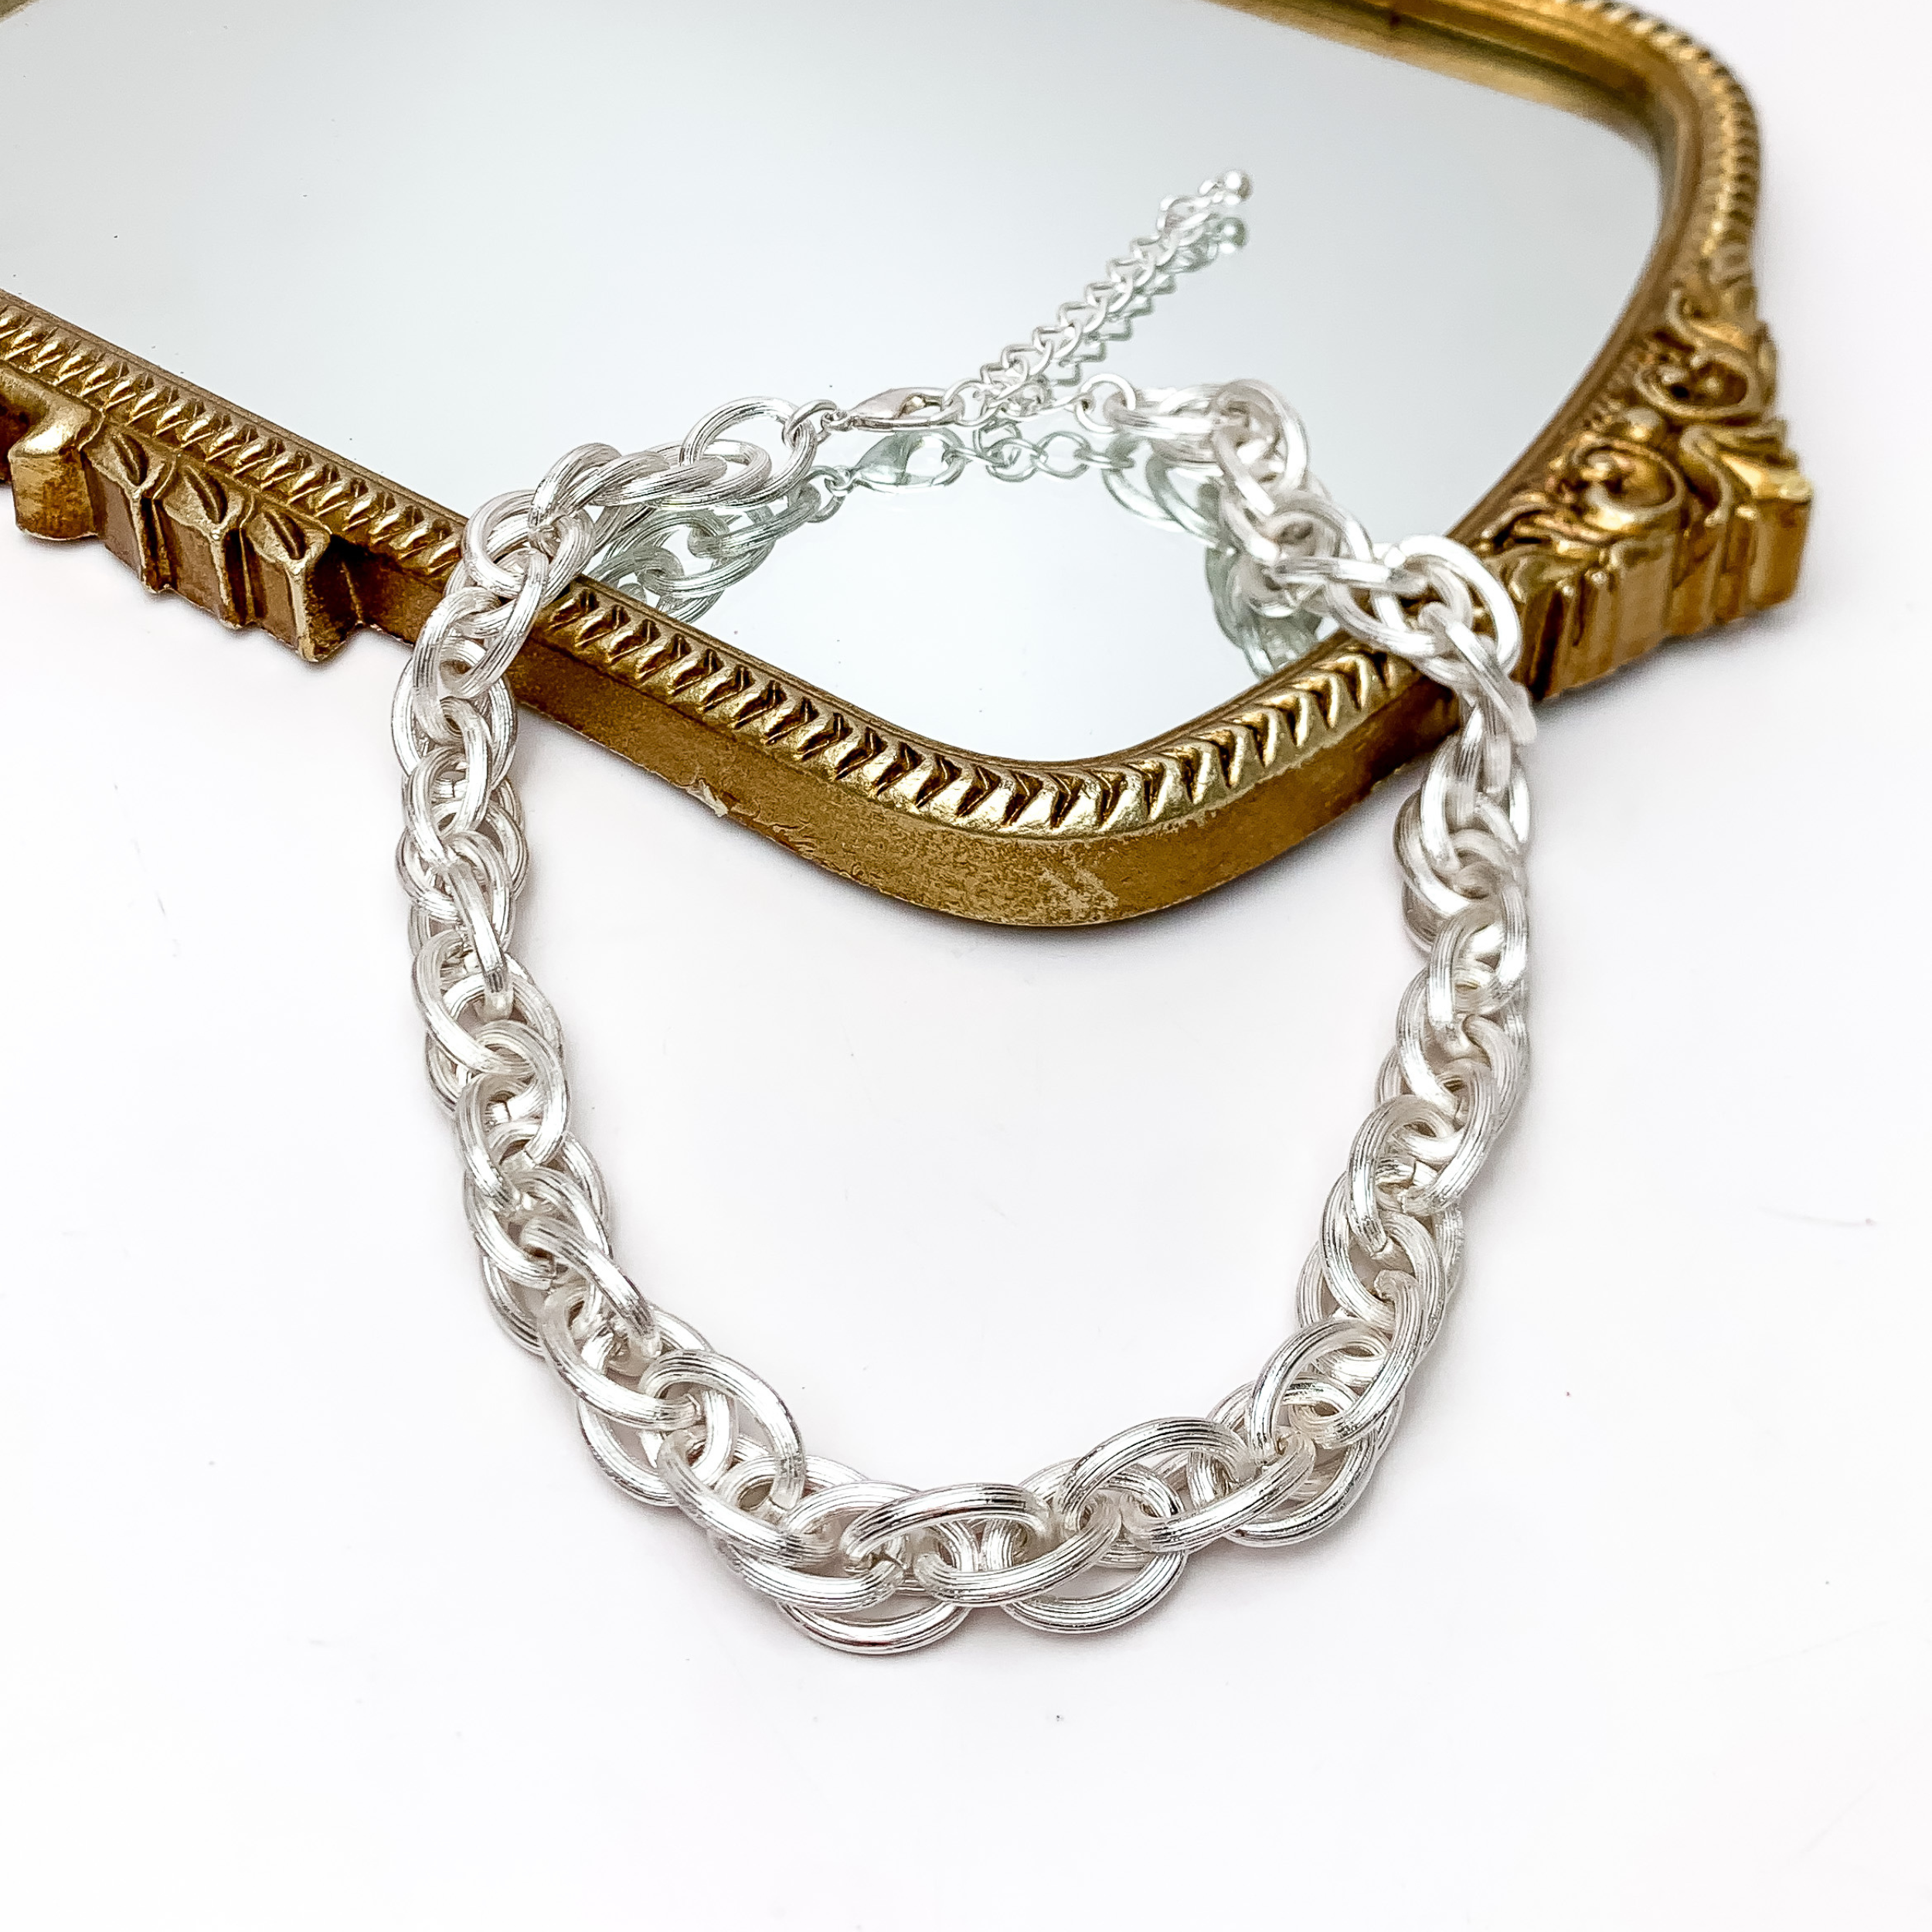 Back To Basics Silver Tone Chain Necklace. Pictured on a white background with part of the necklace laying on a gold frame mirror.